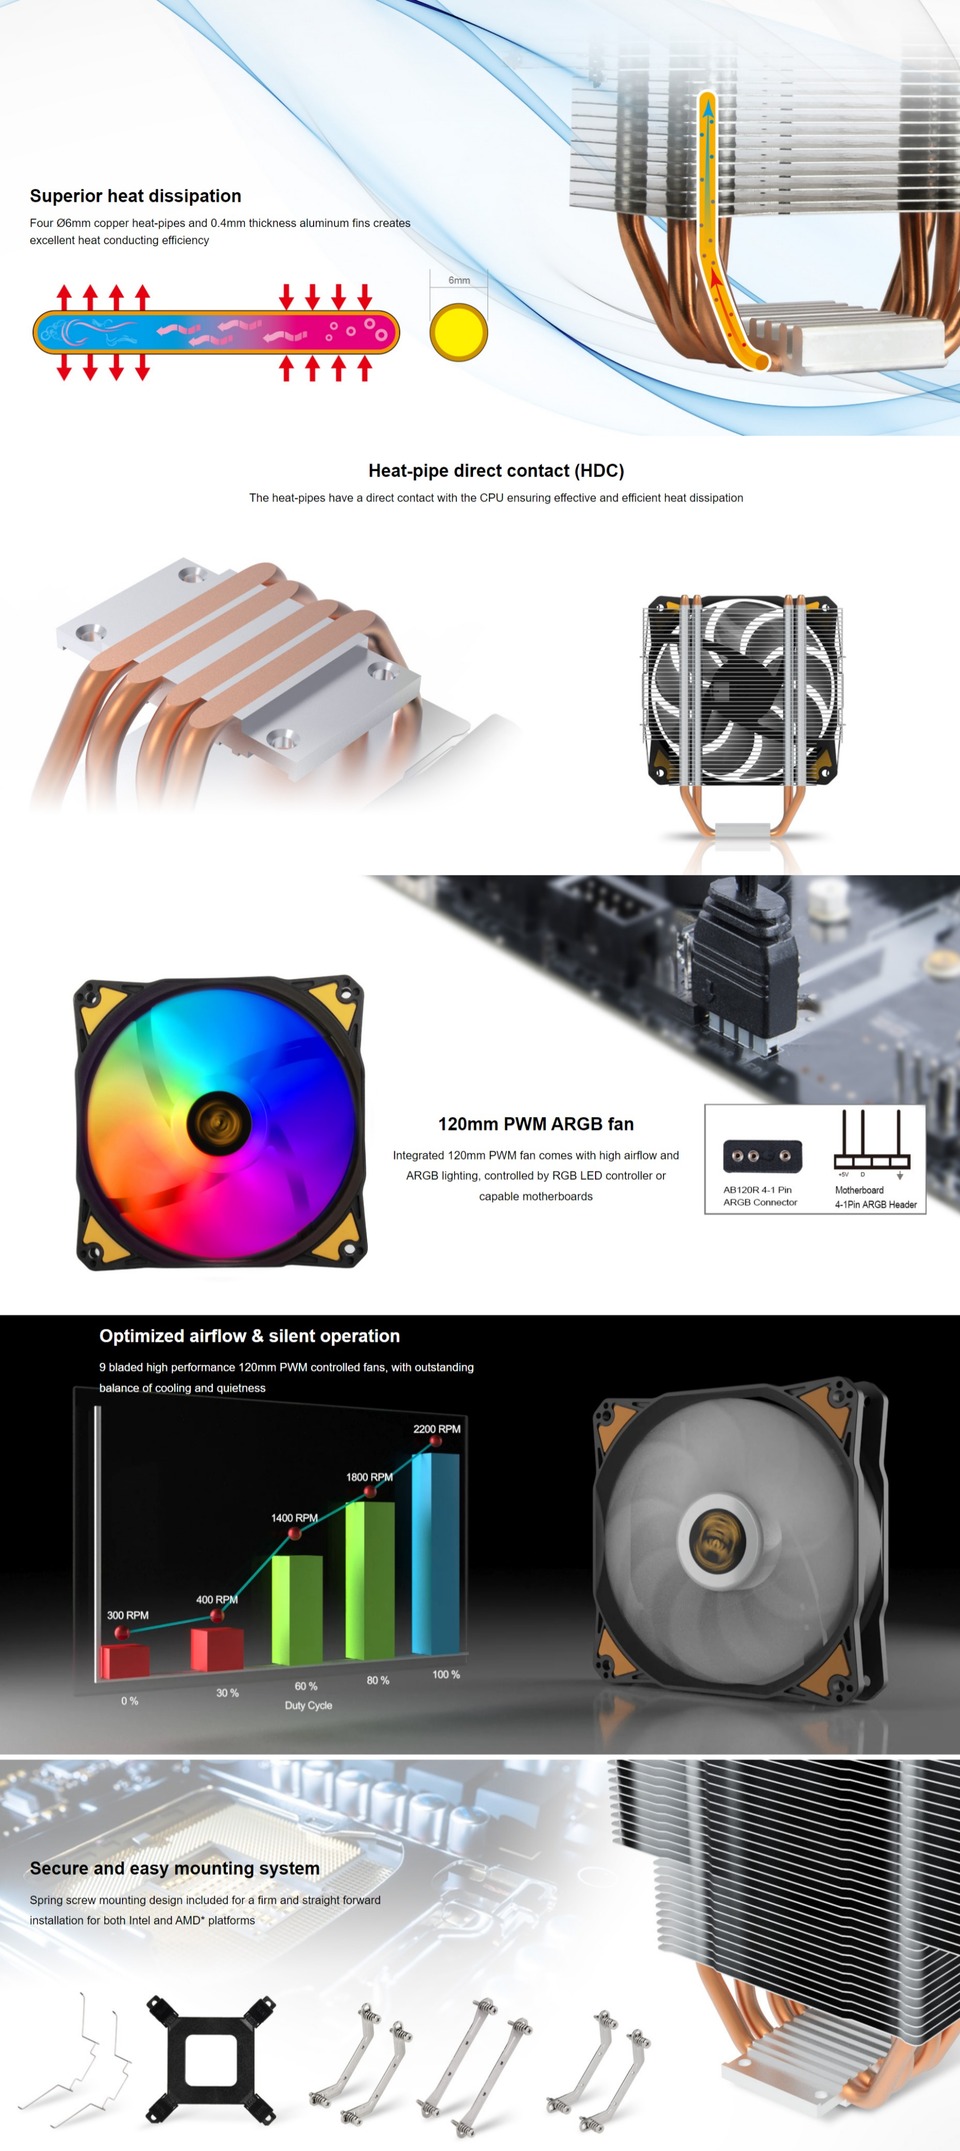 silverstone advanced copper heat-pipe direct contact hdc technology cpu air cooler